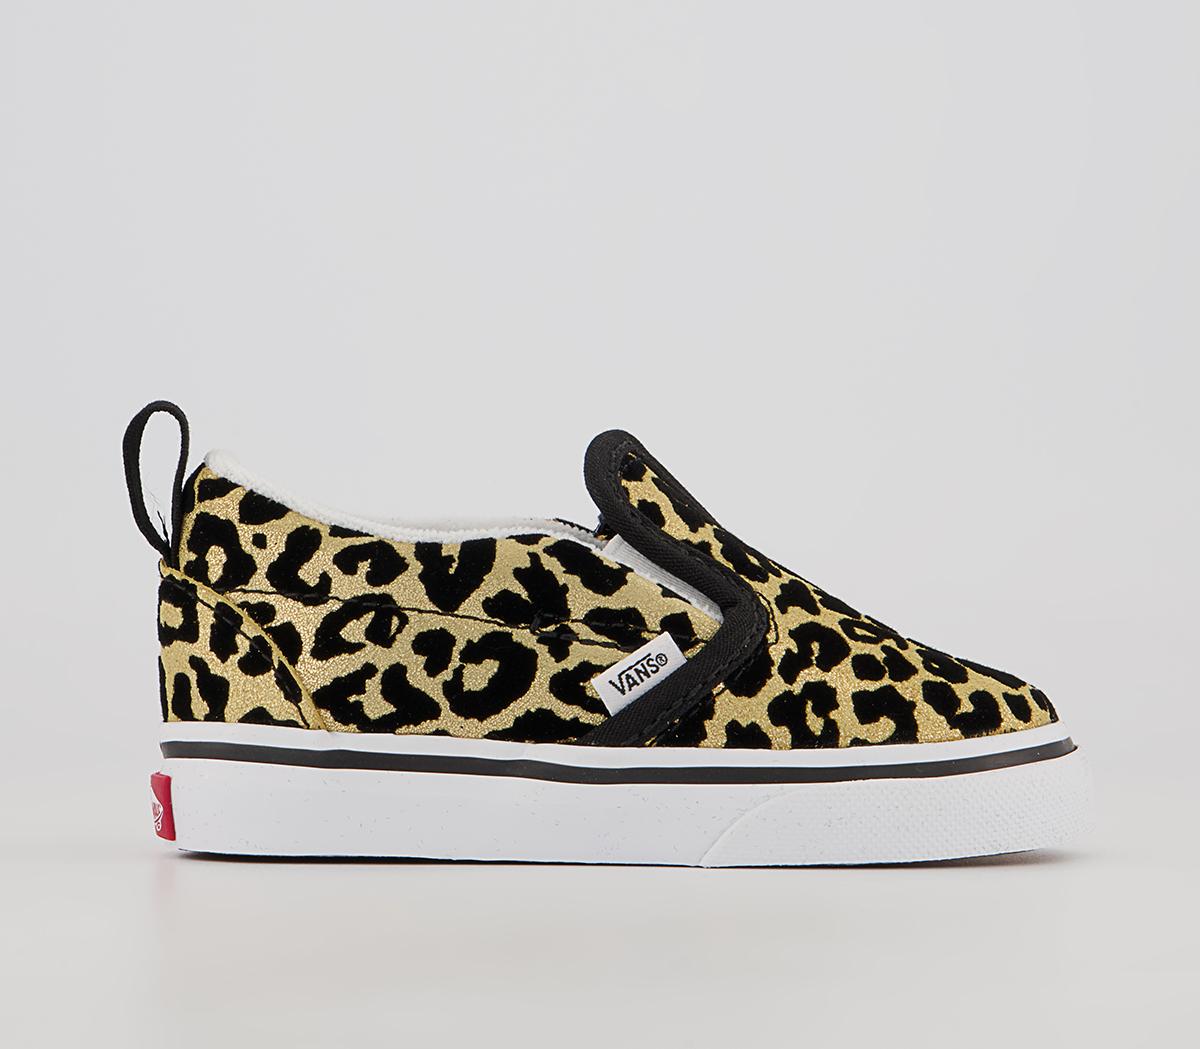 Ruina Elástico arena Vans Classic Slip On Toddlers Trainers Leopard Black White - Unisex